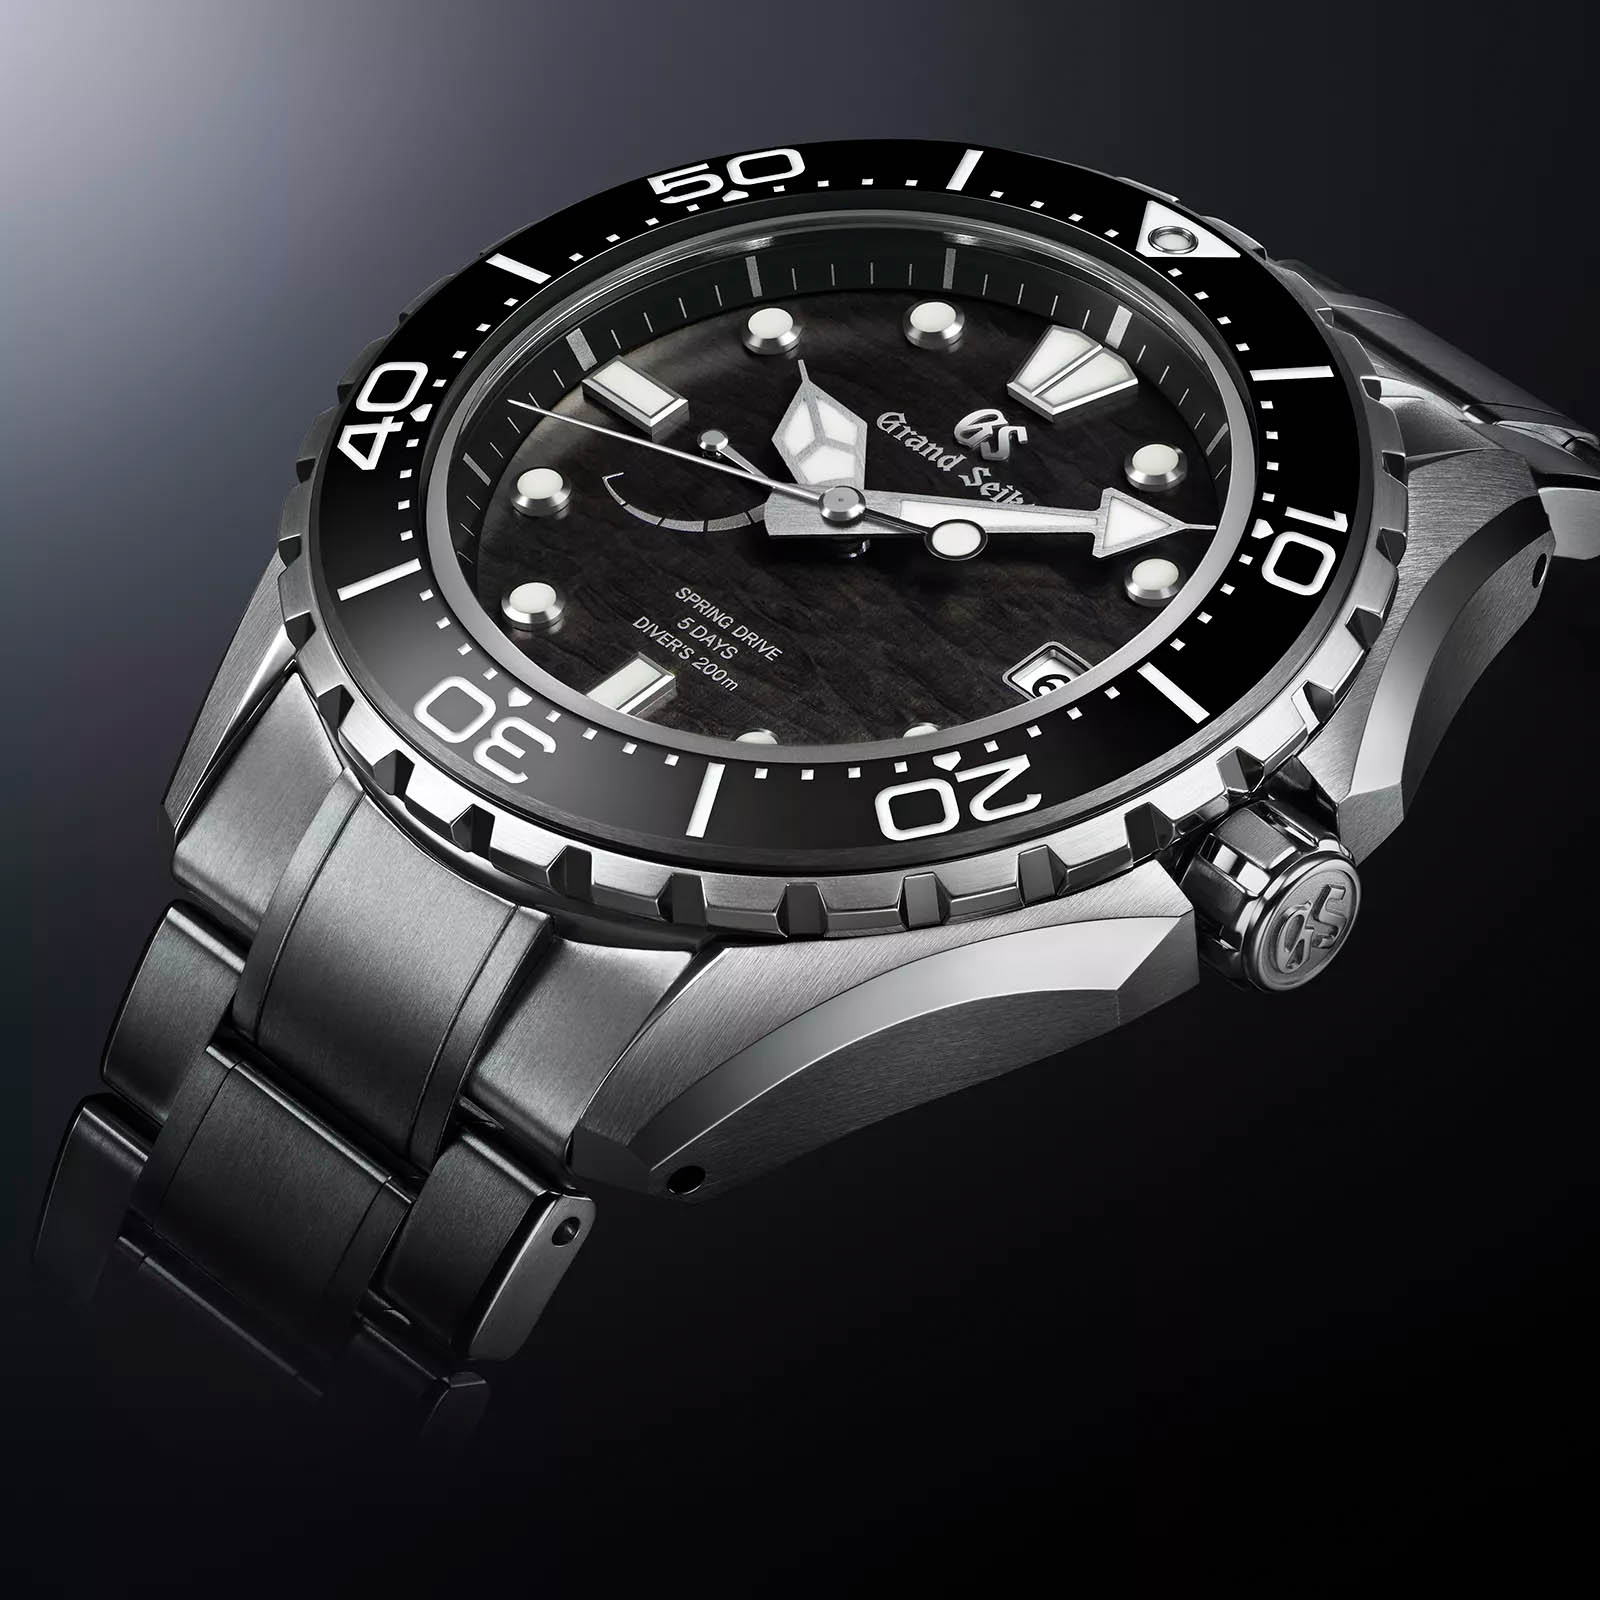 Angle view of Grand Seiko SLGA015 diver's watch with black dial. 